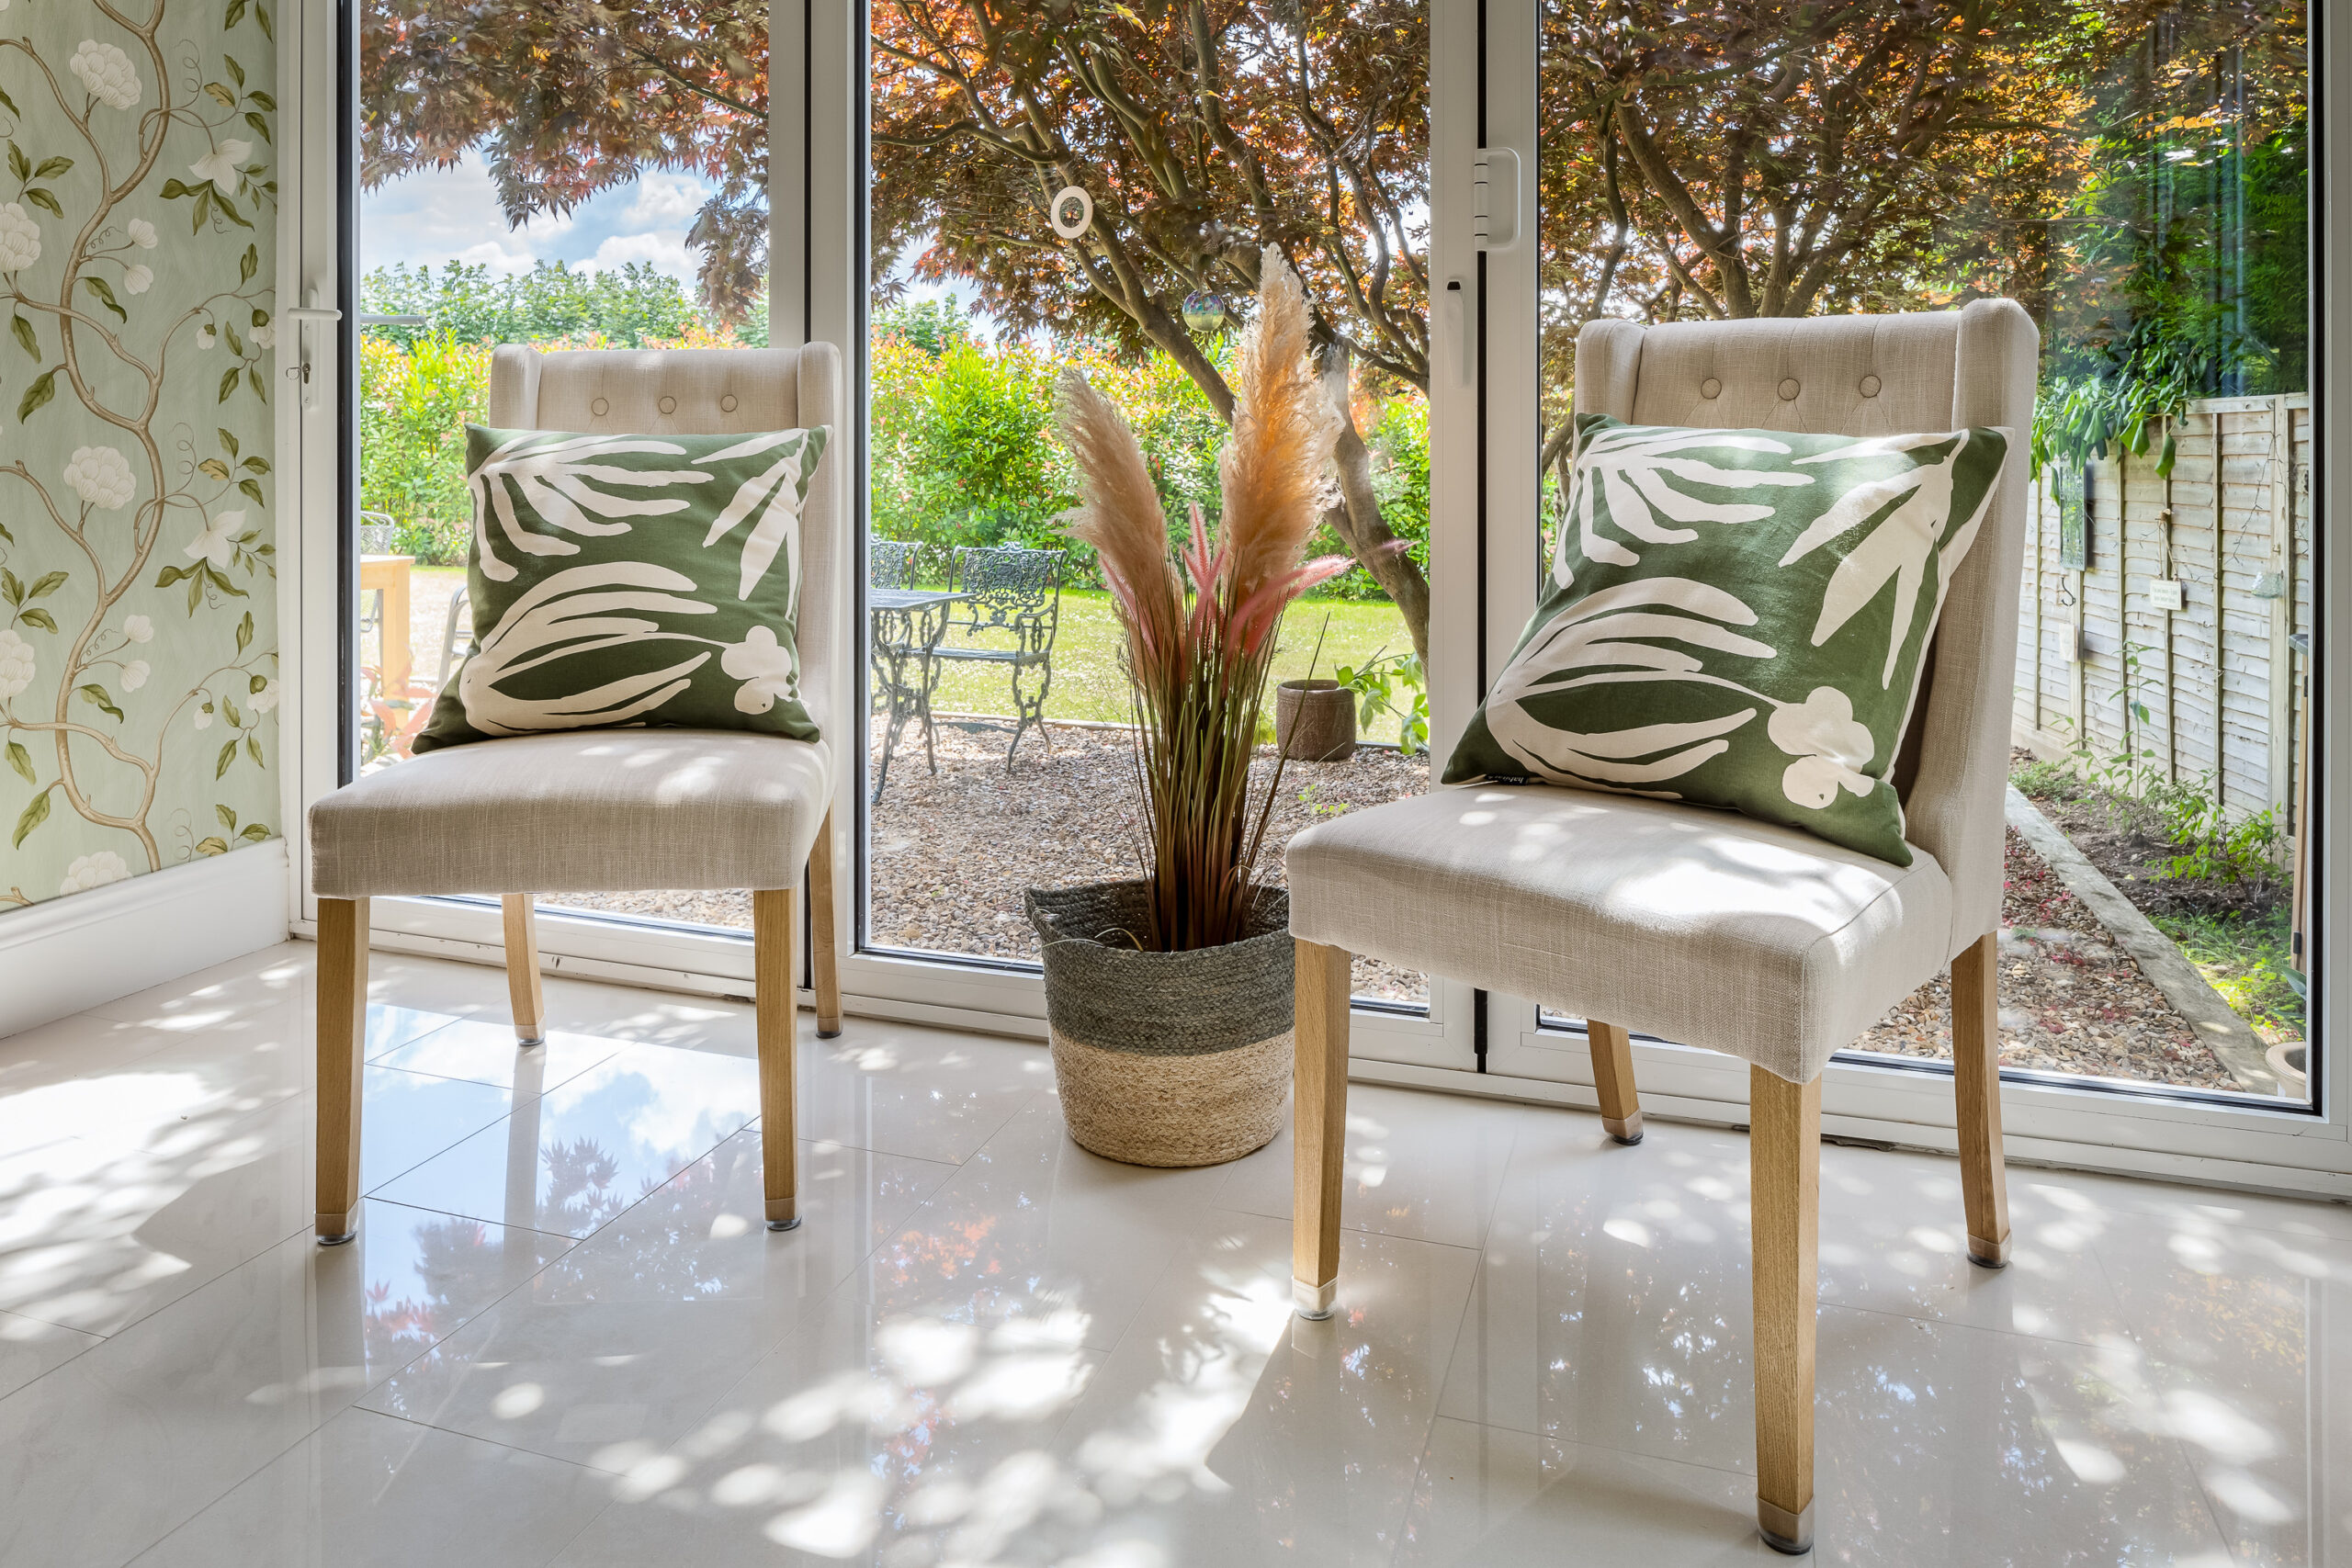 seating area, natural light, bifold doors, views onto nature, relaxing areas, views onto garden, biophilic design, biophilic interiors, styling properties, renovations, home staging, country style interiors